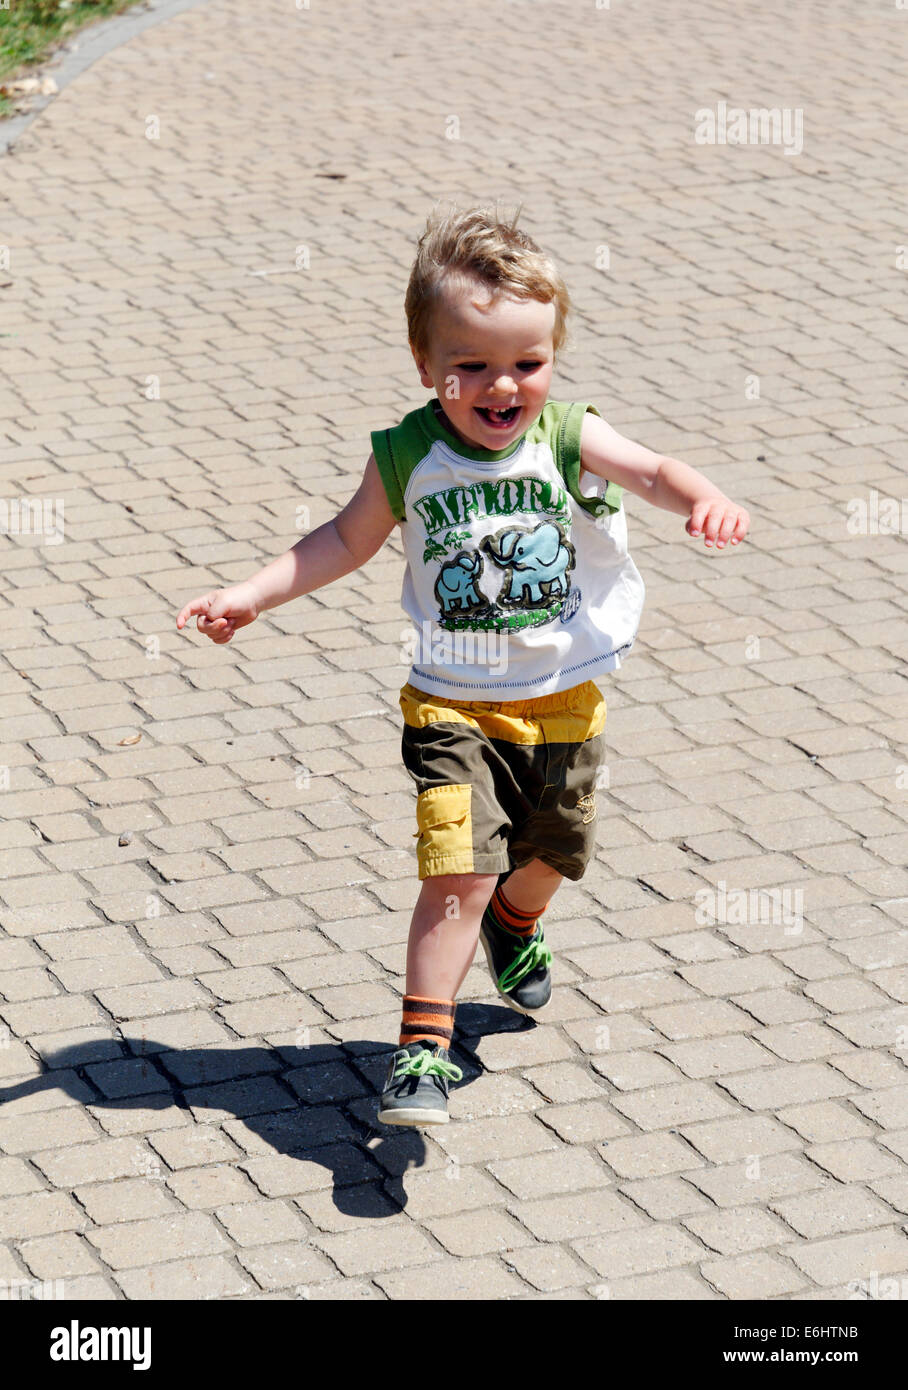 A happy young boy running at full speed Stock Photo